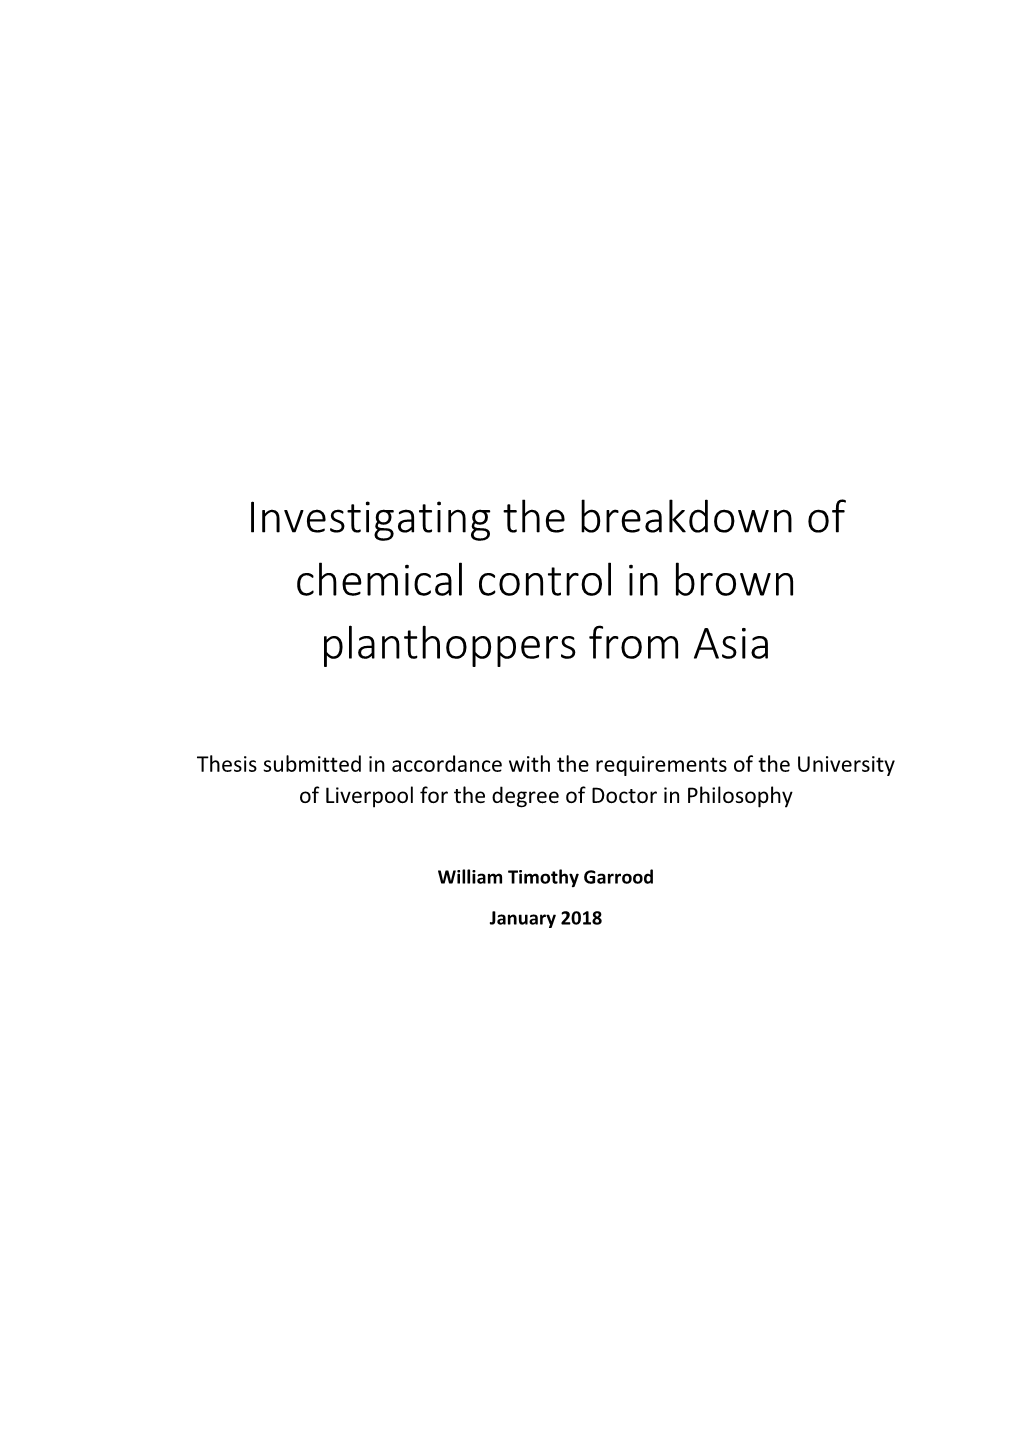 Investigating the Breakdown of Chemical Control in Brown Planthoppers from Asia